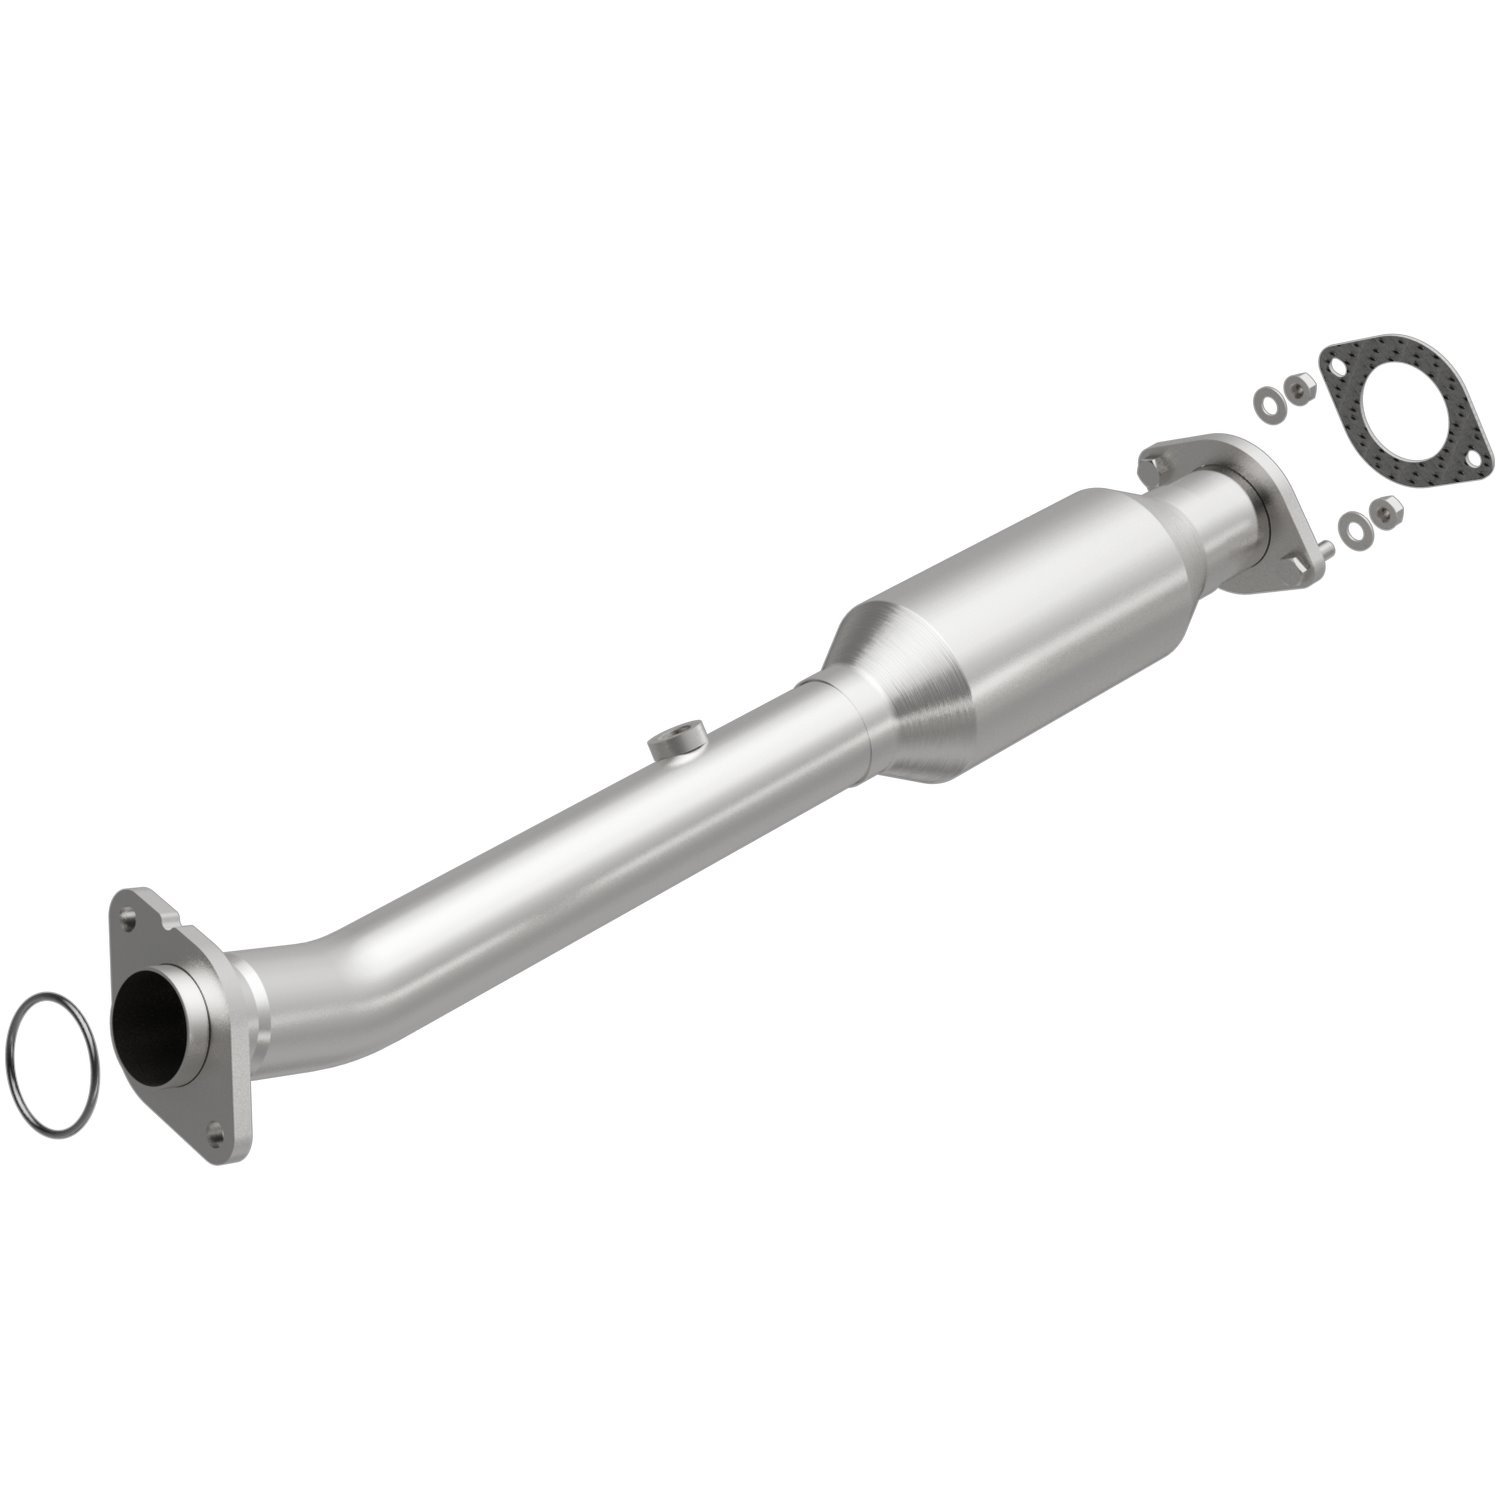 OEM Grade Federal / EPA Compliant Direct-Fit Catalytic Converter 21-121